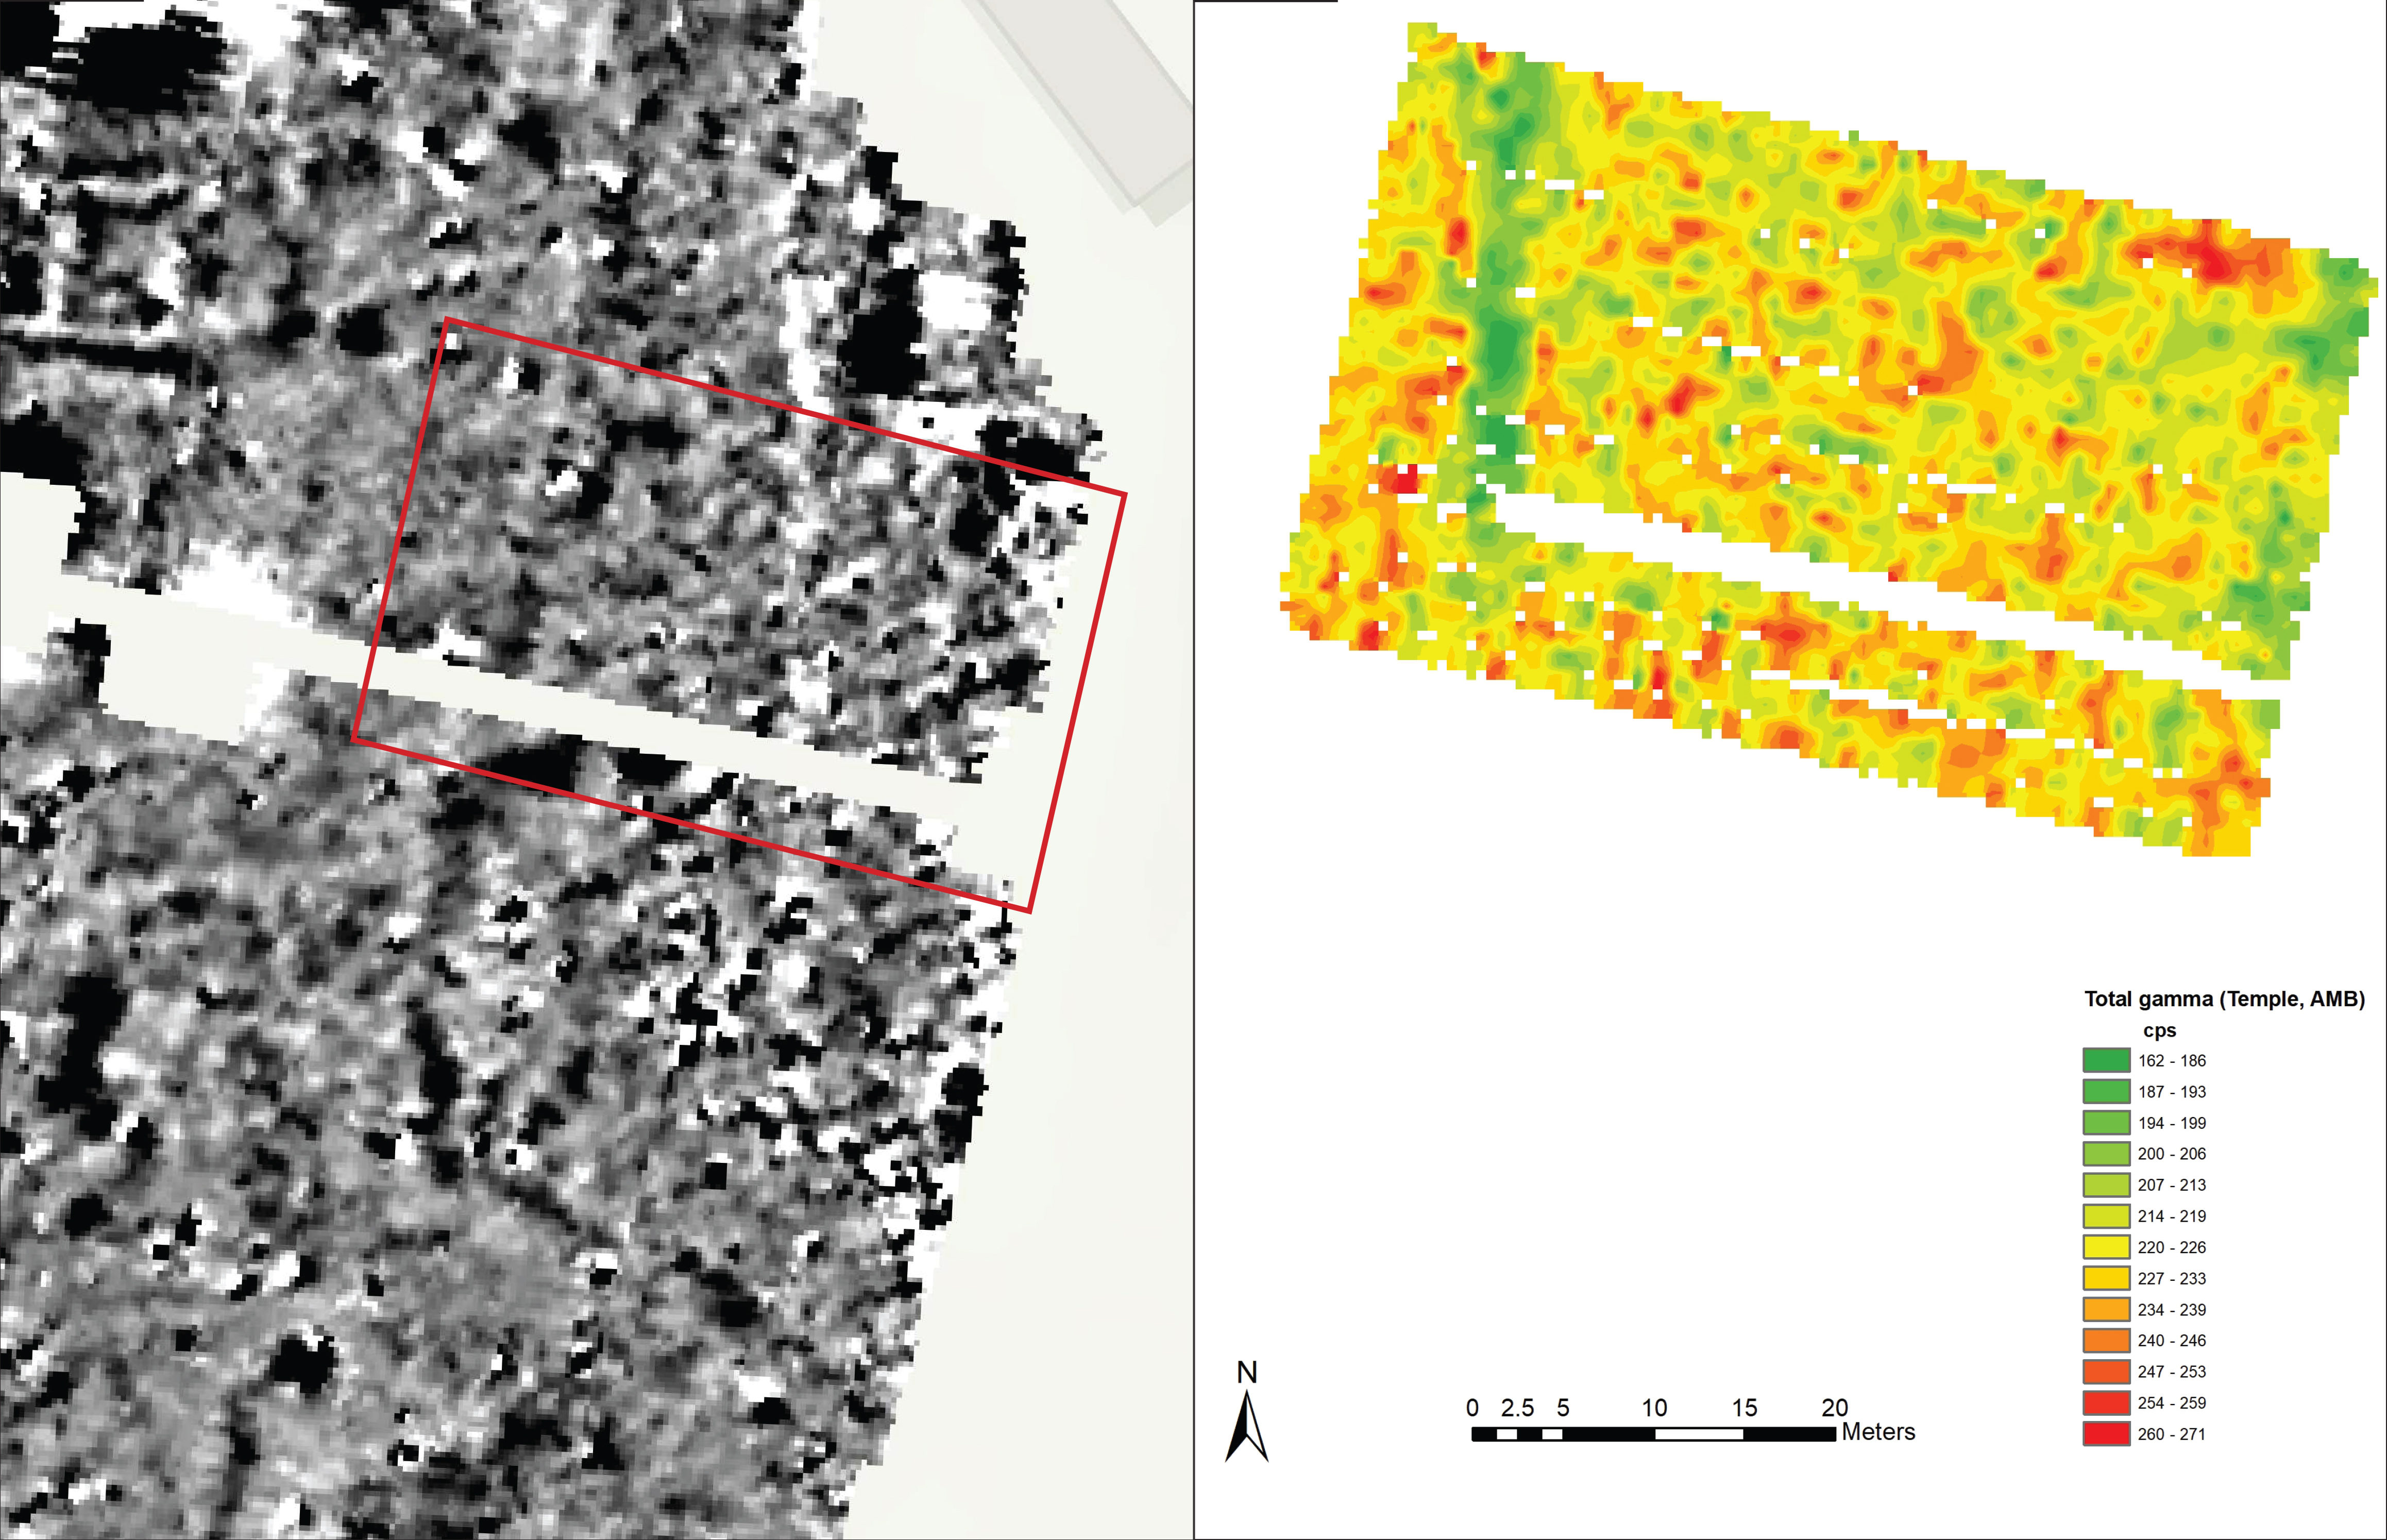 Geophysical survey image (L) and gamma-ray spectrometer survey image (R) at the Temple site in Silchester